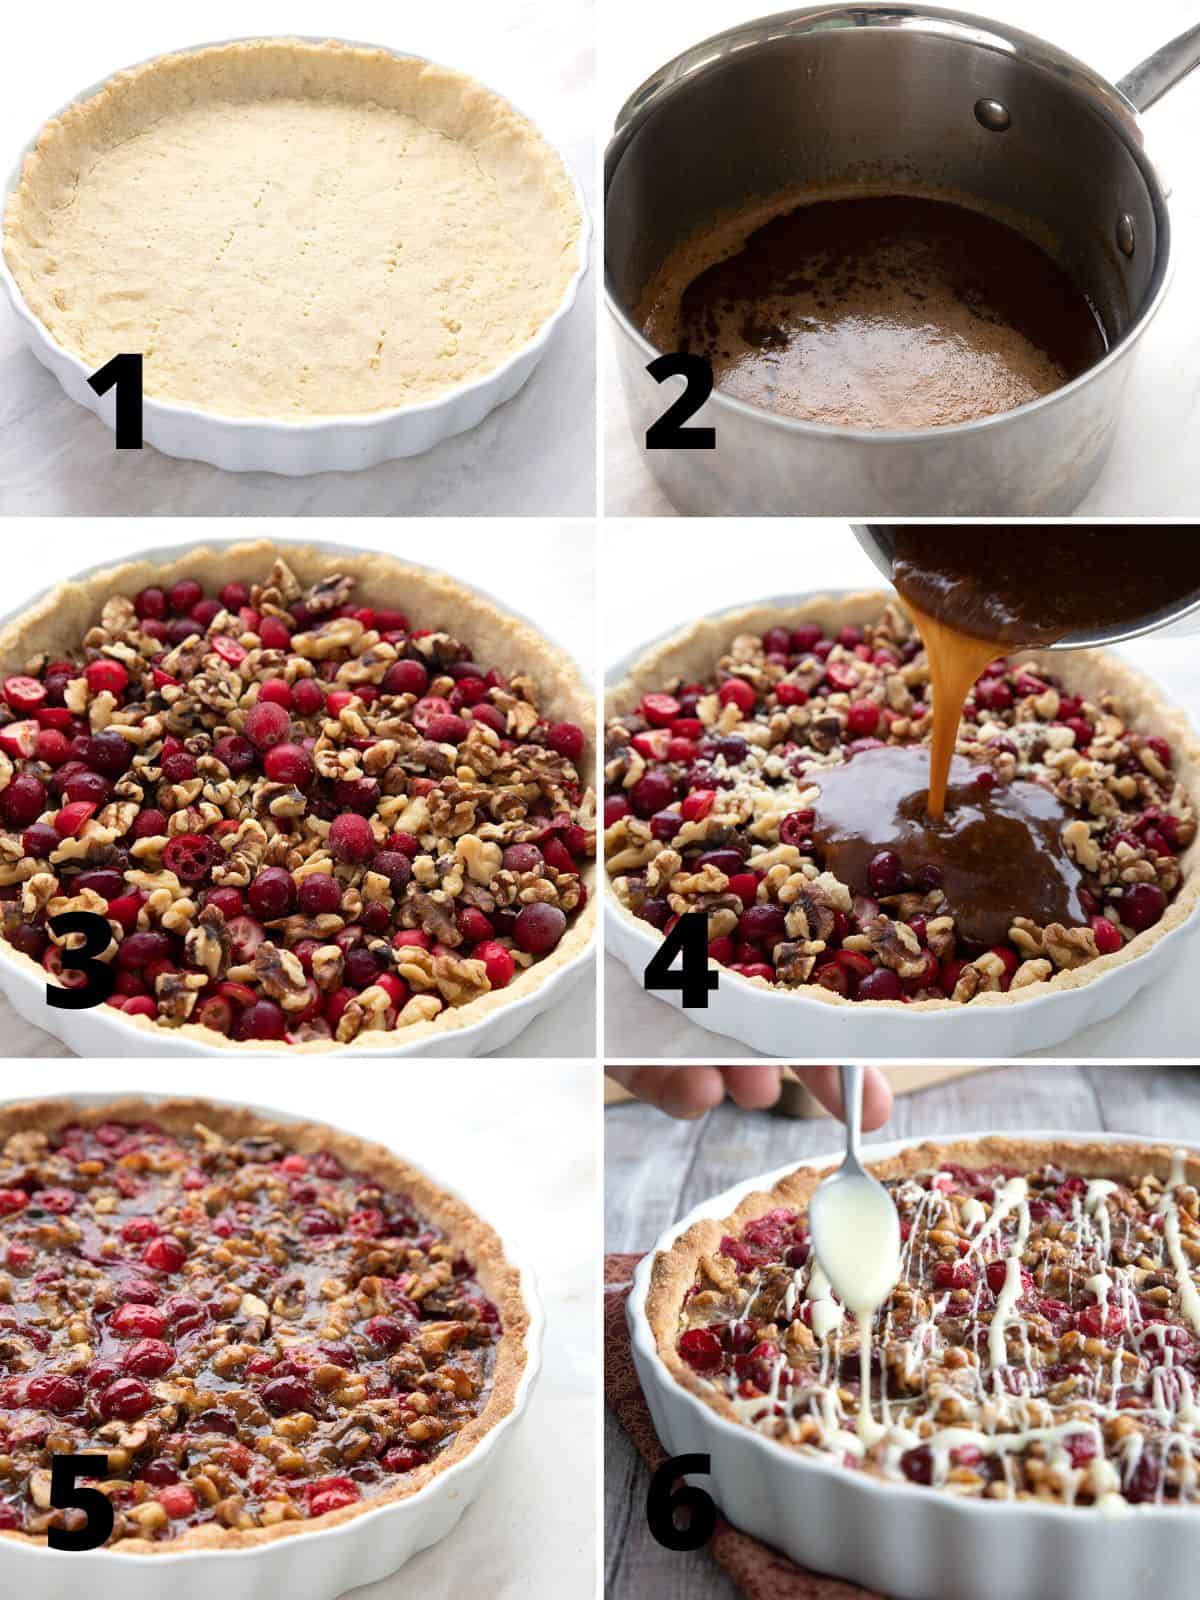 A collage of 6 images showing the steps for making Keto Cranberry Walnut Tart.